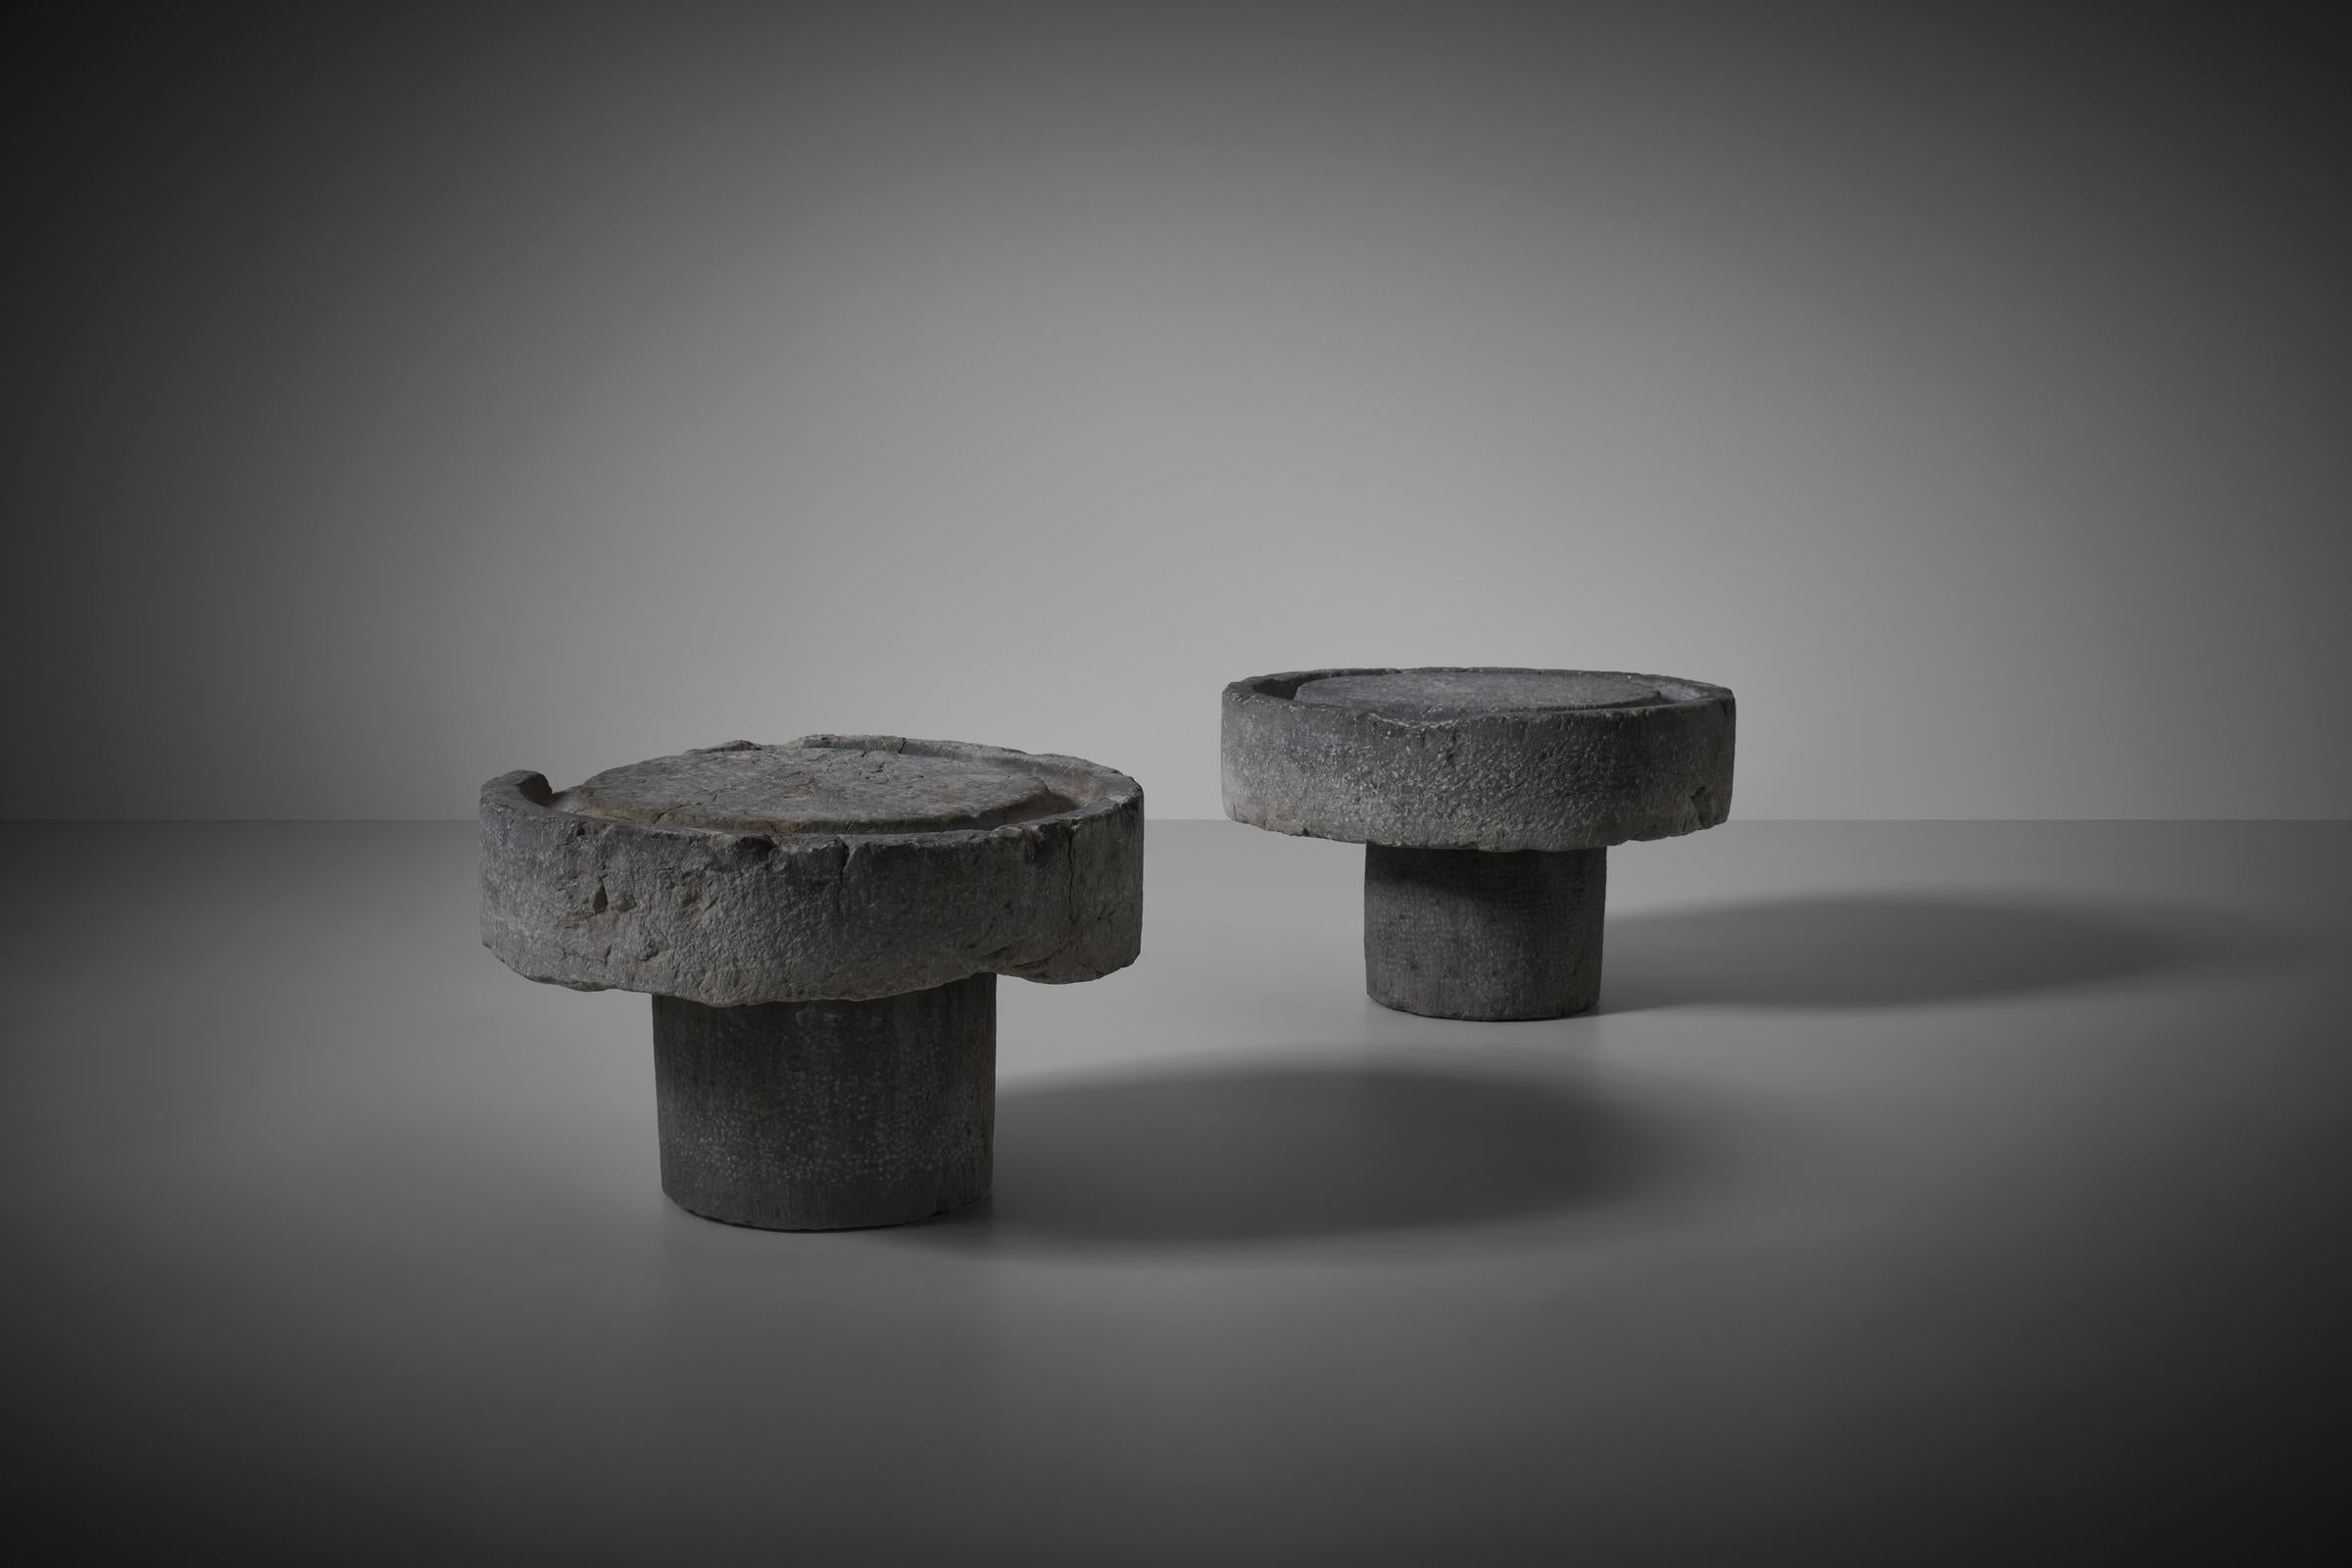 Set of two heavy solid marble cylindrical side tables, France 19th century. Wonderful decorative tables full of character. The stones where originally used as millstones for the extraction of olive oil and gained a wonderful patina due to their